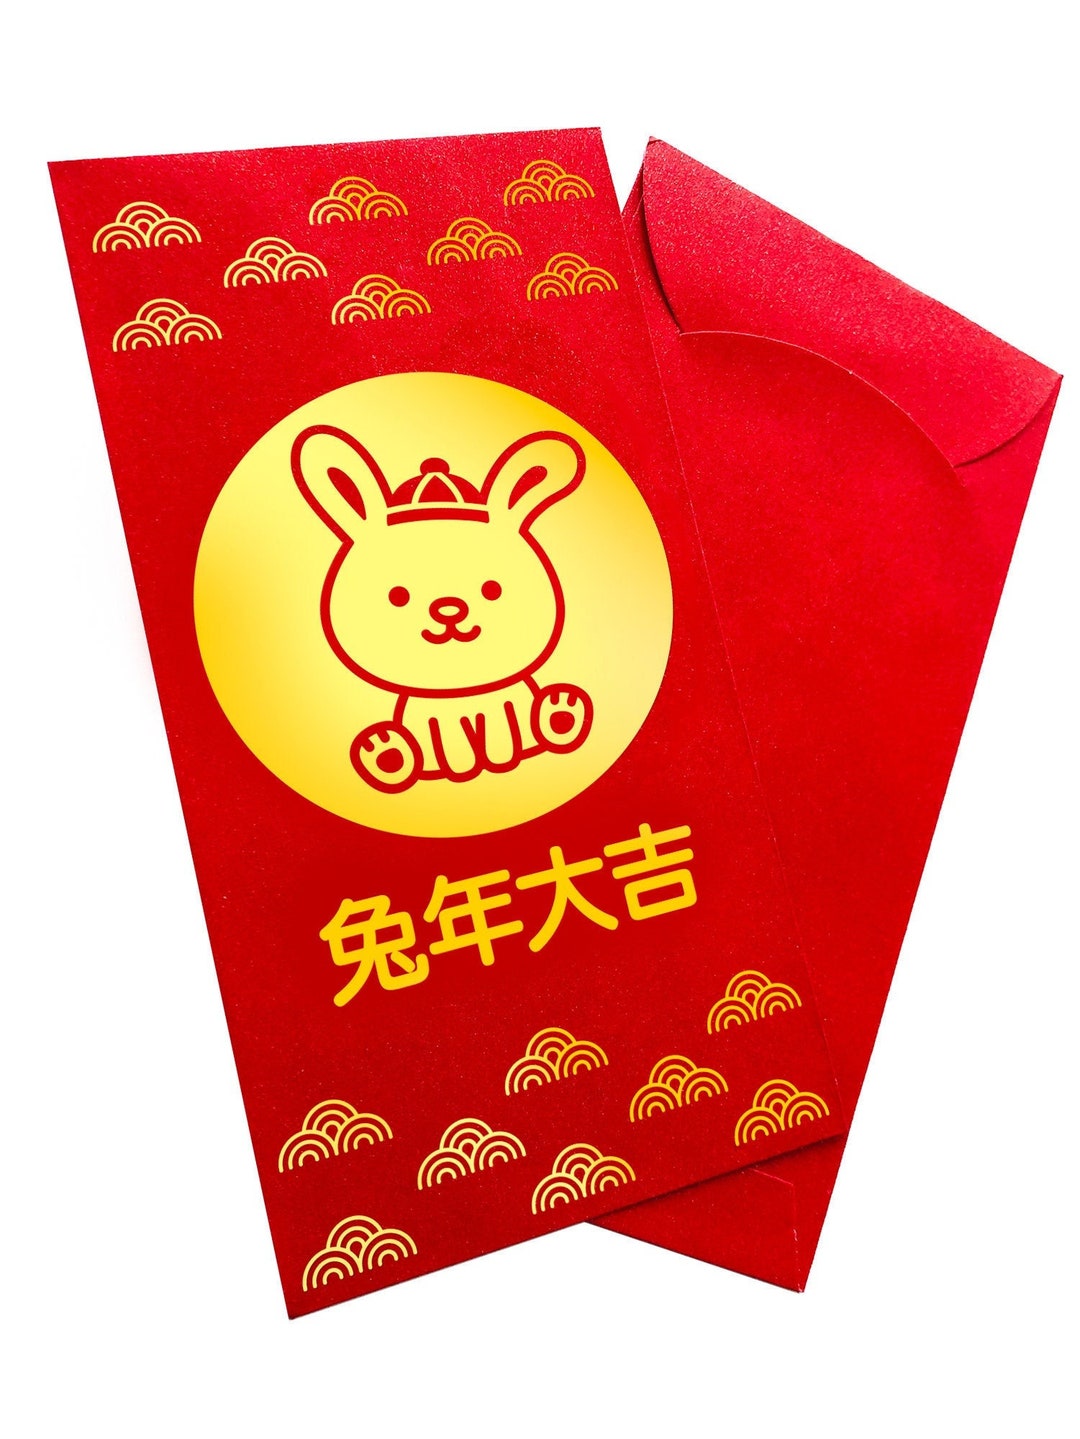 10x Asian Chinese Lunar New Year Year of Rabbit Red Envelopes 